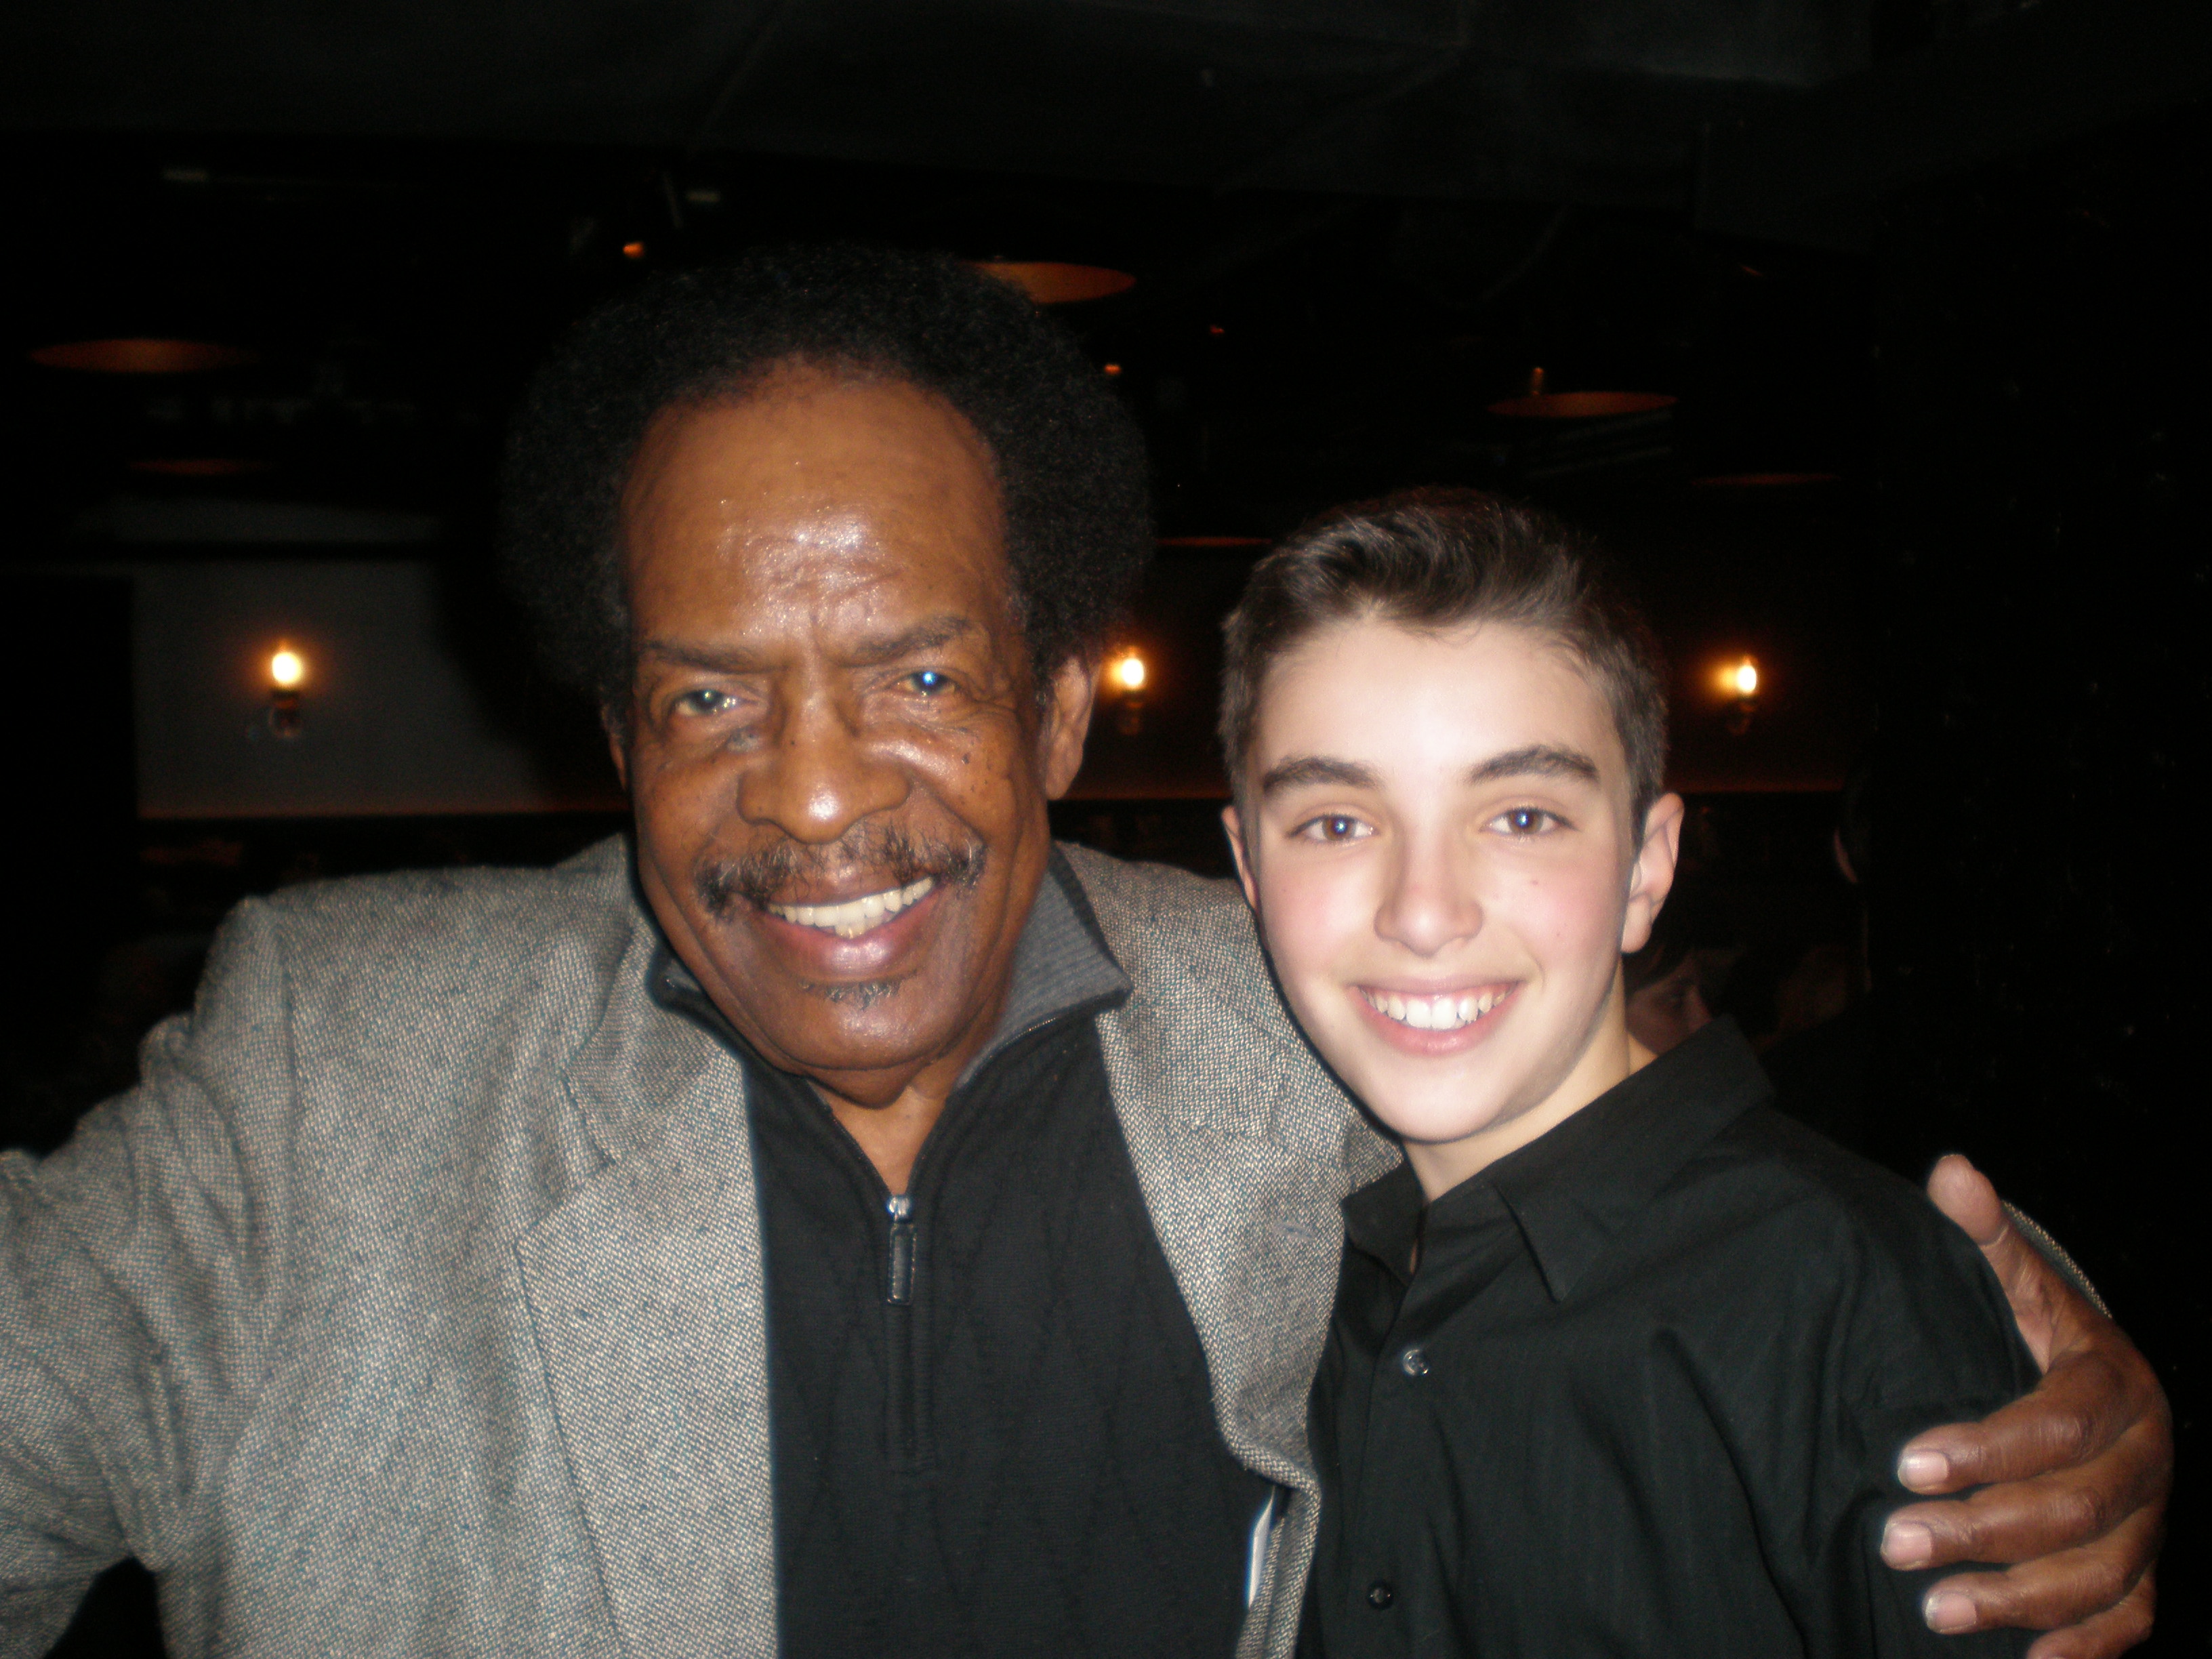 Saleno Clarke and christopher hanging out at the Jazz Standard NYC 2009